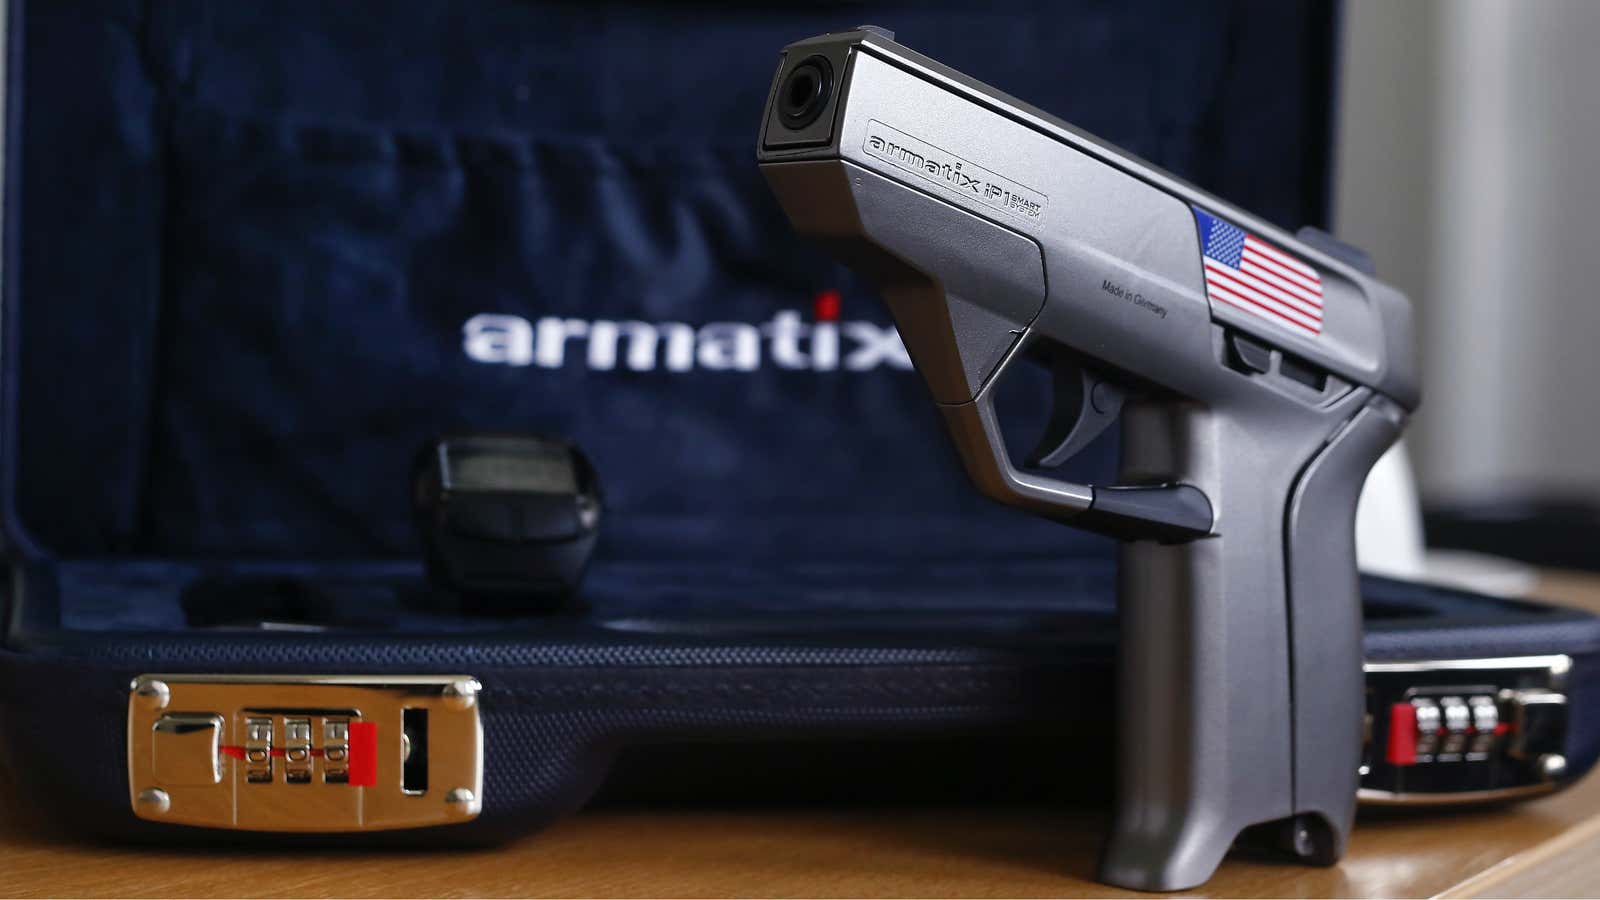 Some gun vendors in the US have received death threats for attempting to sell “smart guns.”